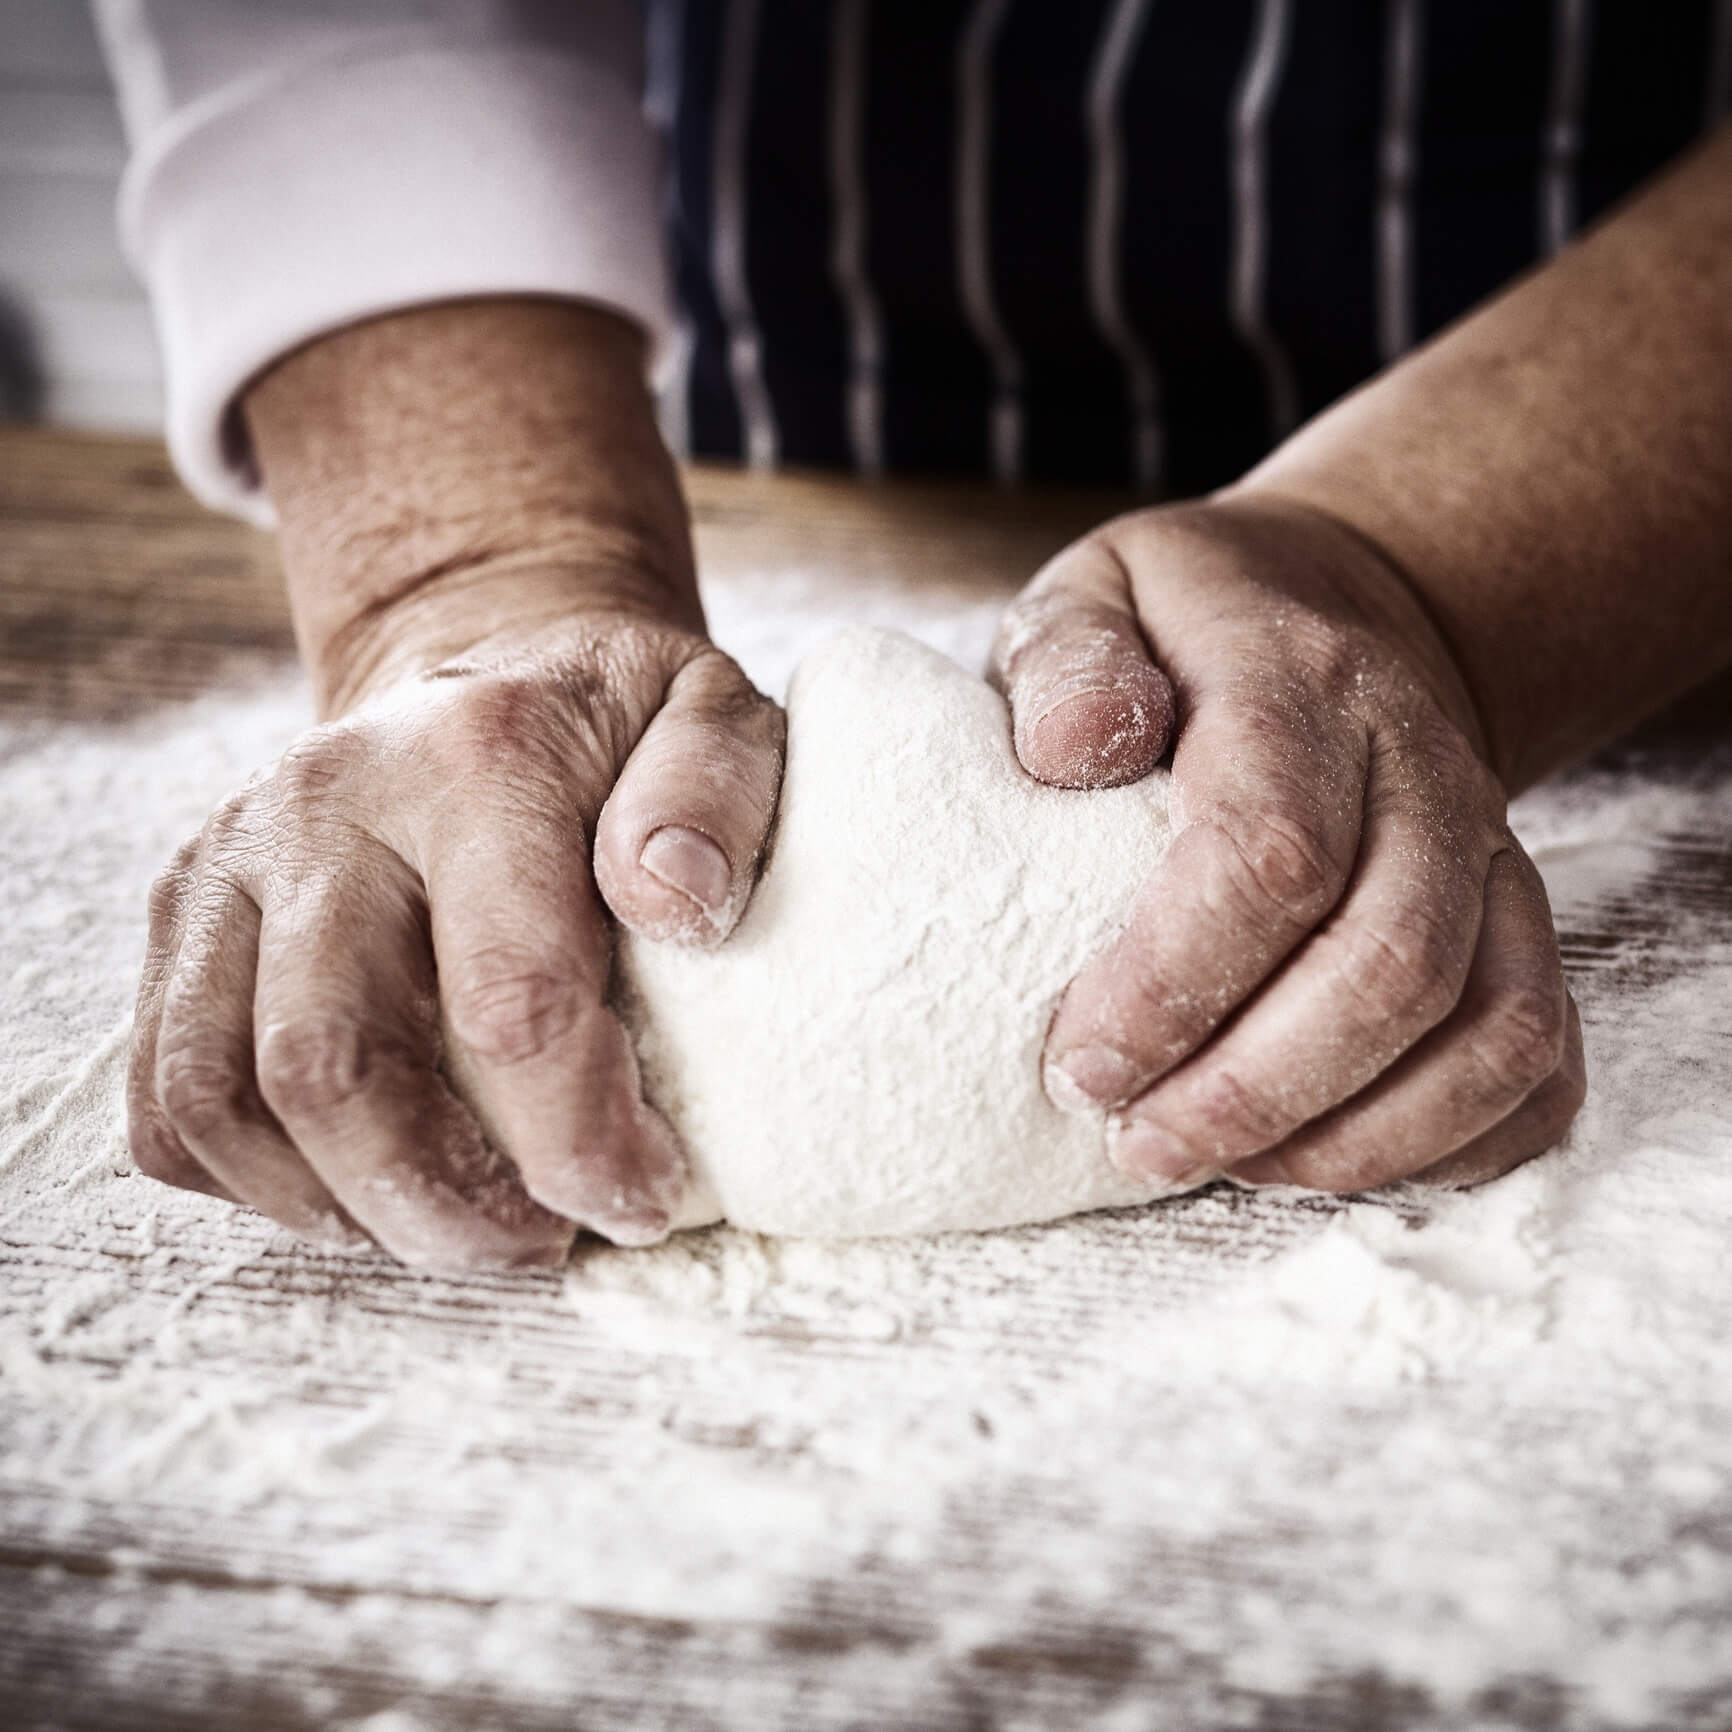 Baker with Bare Hands Kneading Dough